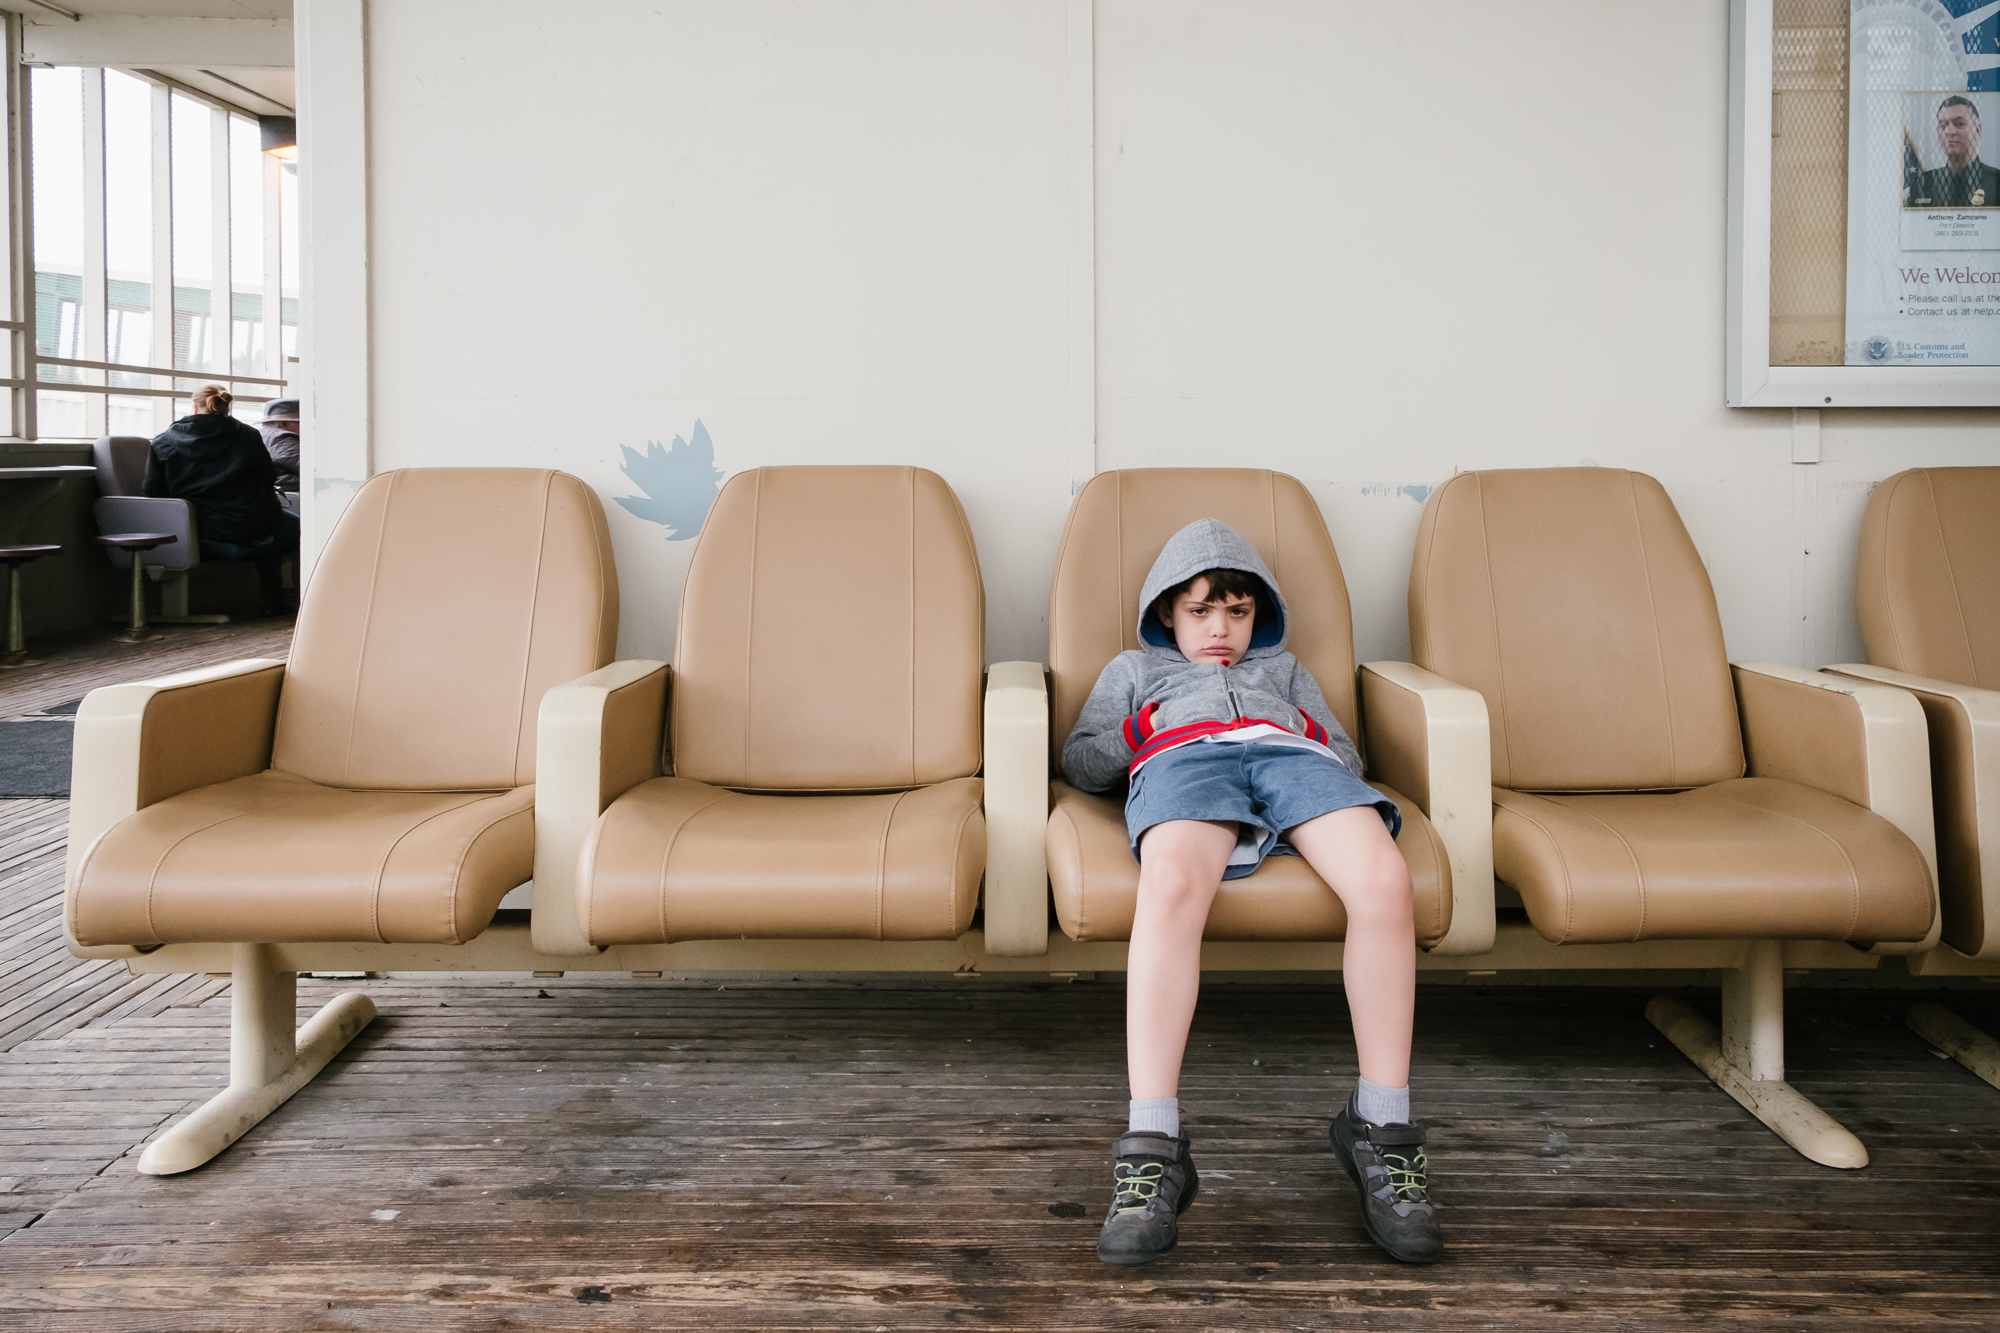 bored boy in ferry terminal - documentary family photography